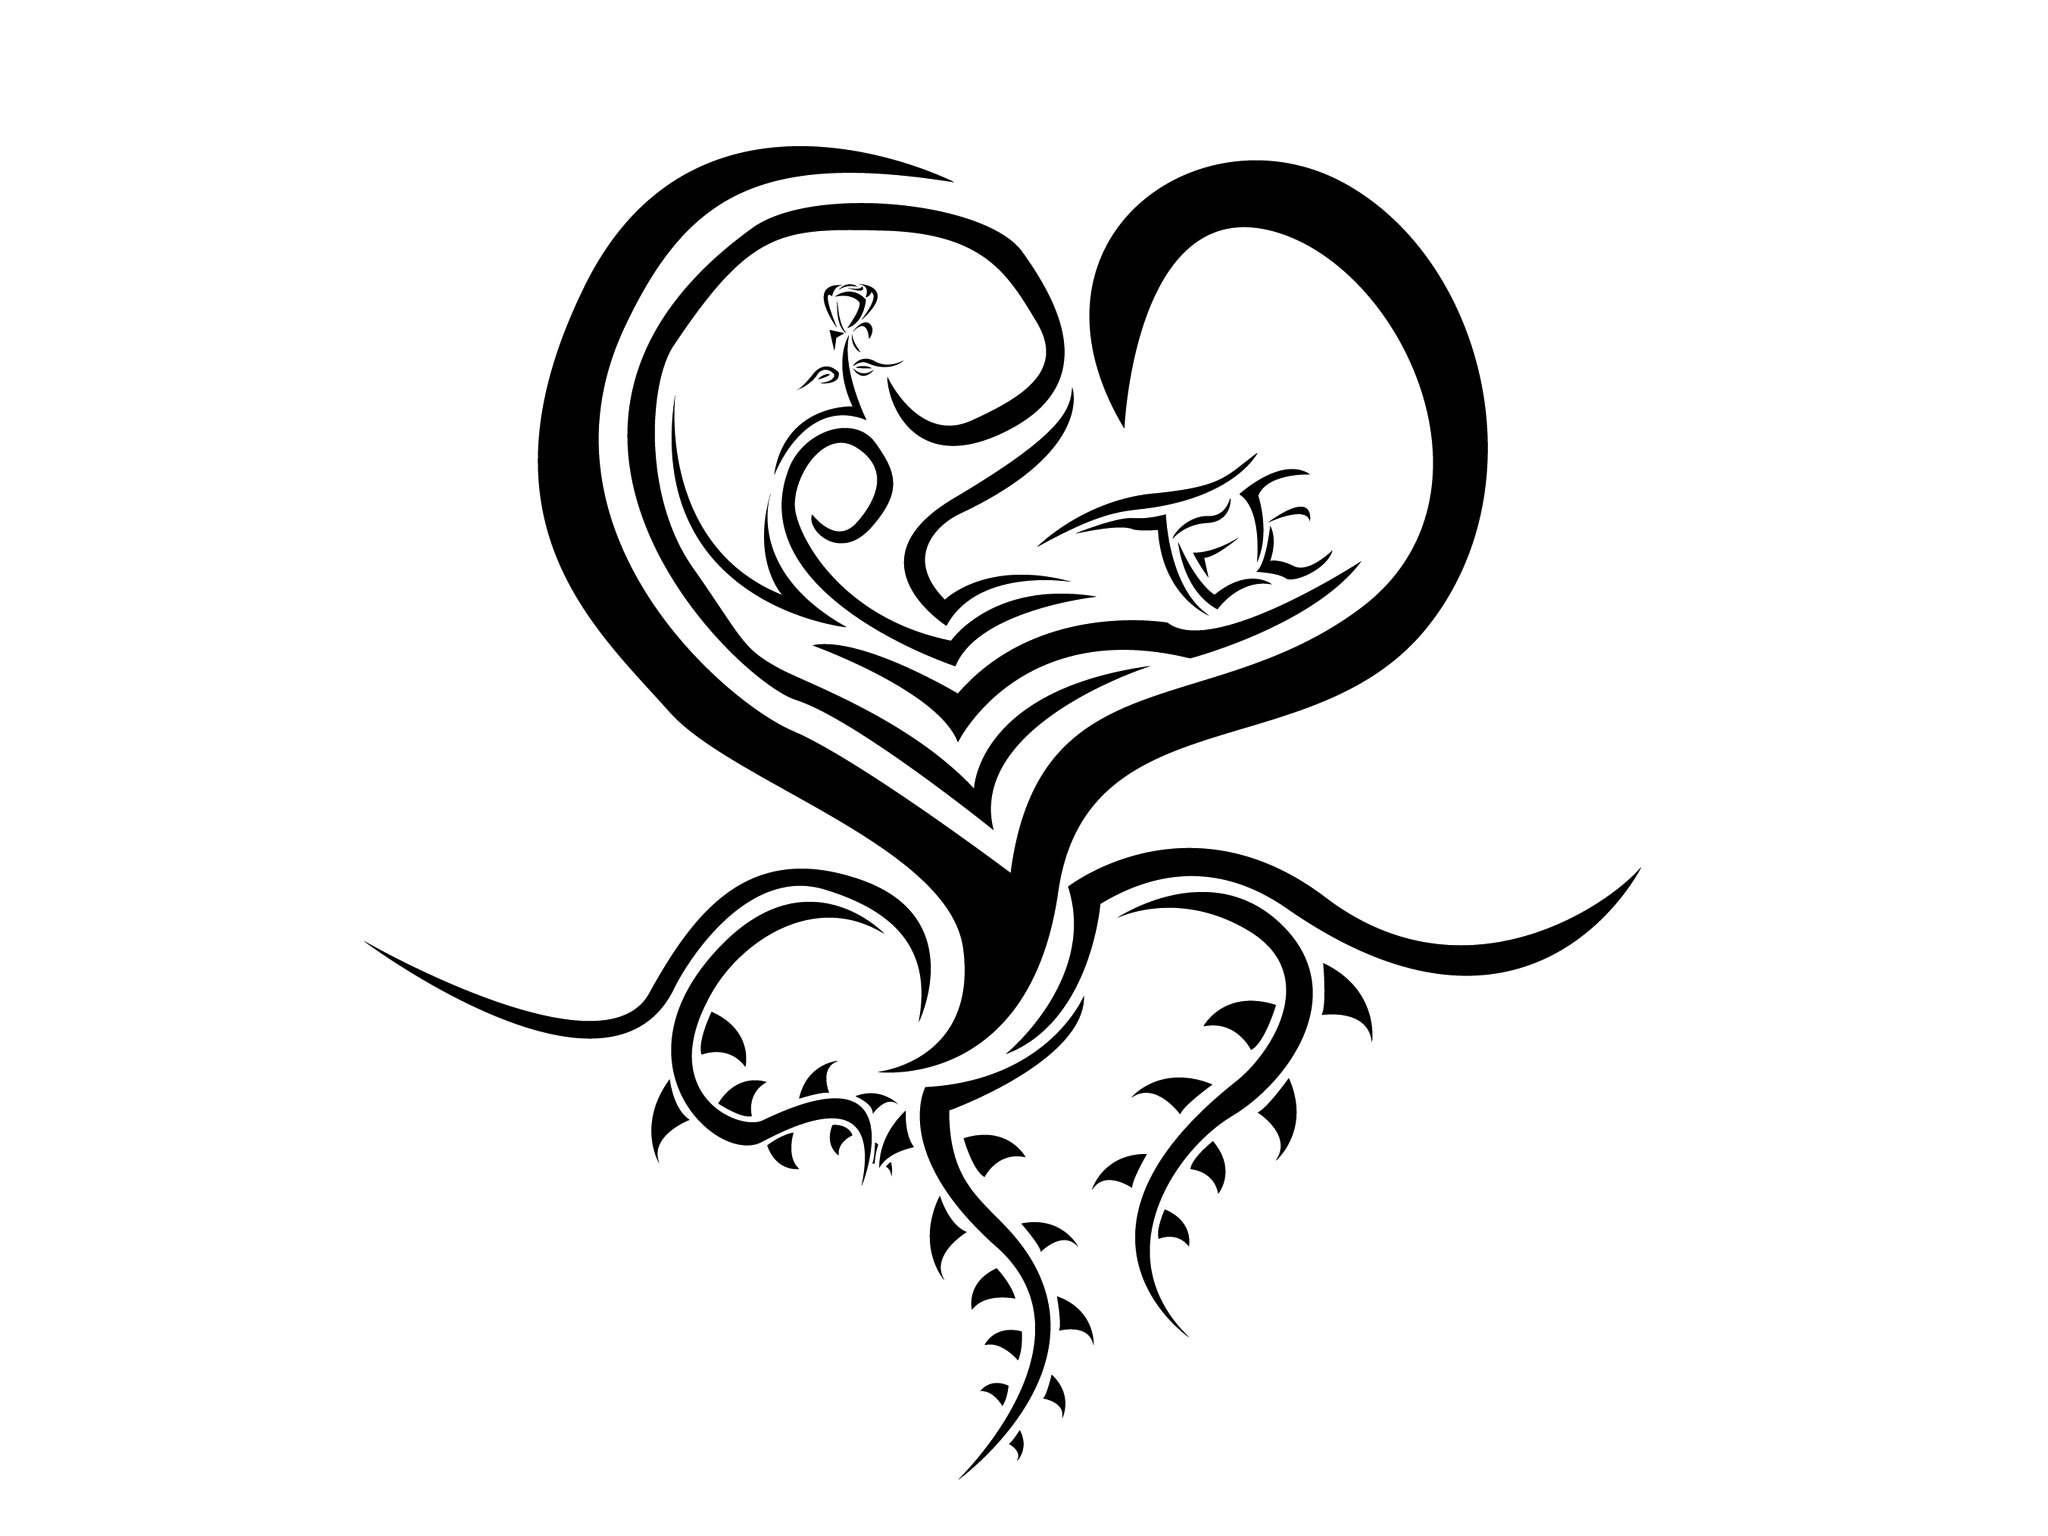 Curved Heart Tattoo Wallpaper 2048x1536 px Free Download ...